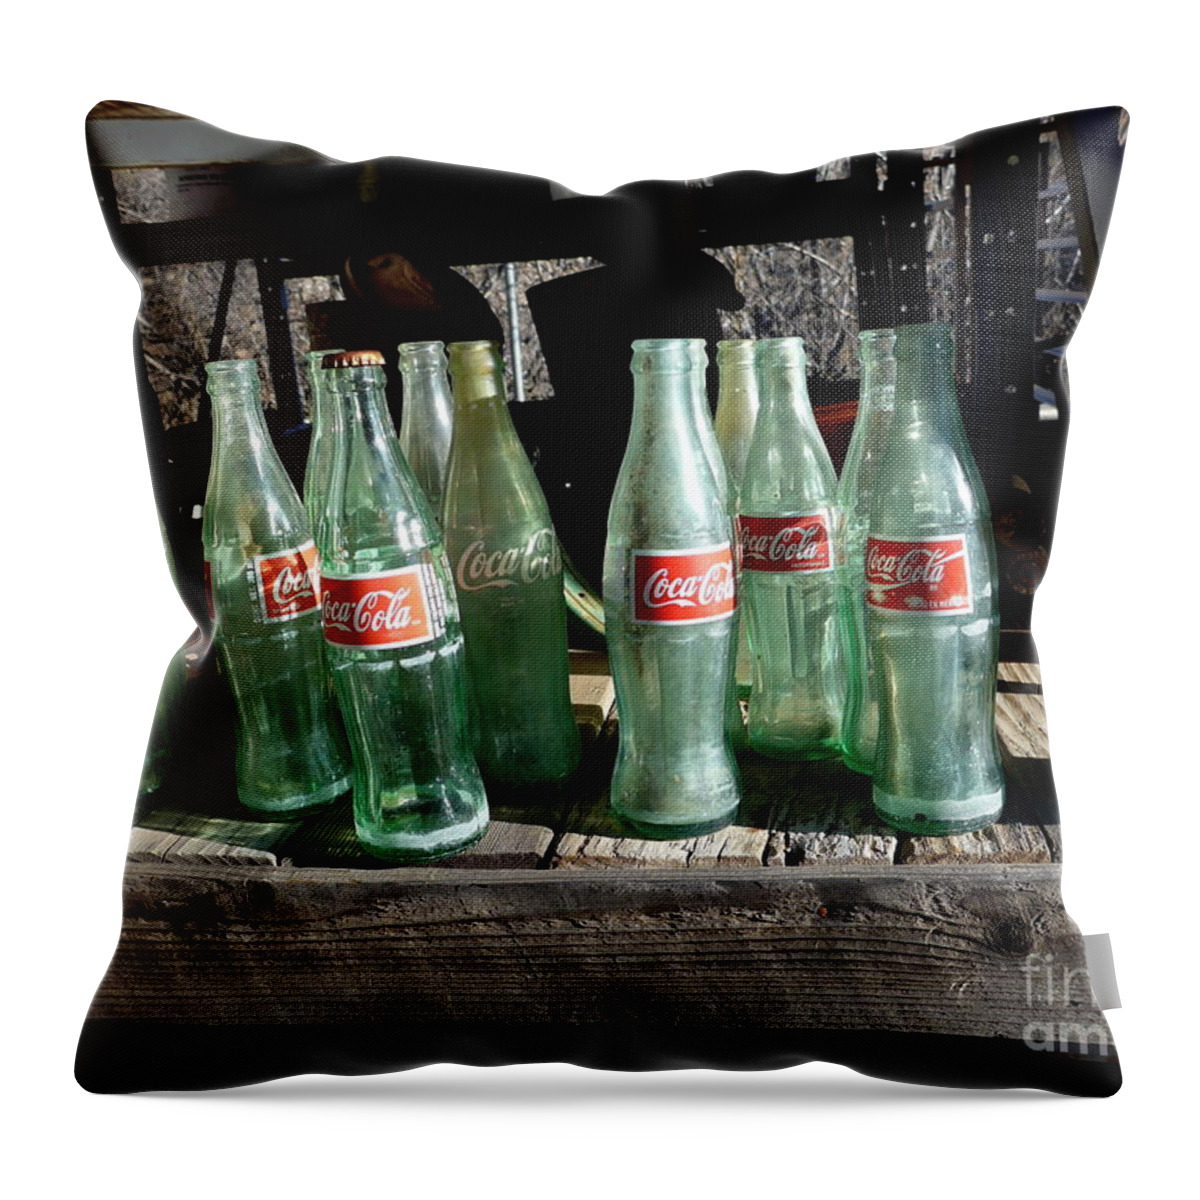  Throw Pillow featuring the photograph Coke Bottles by Mars Besso